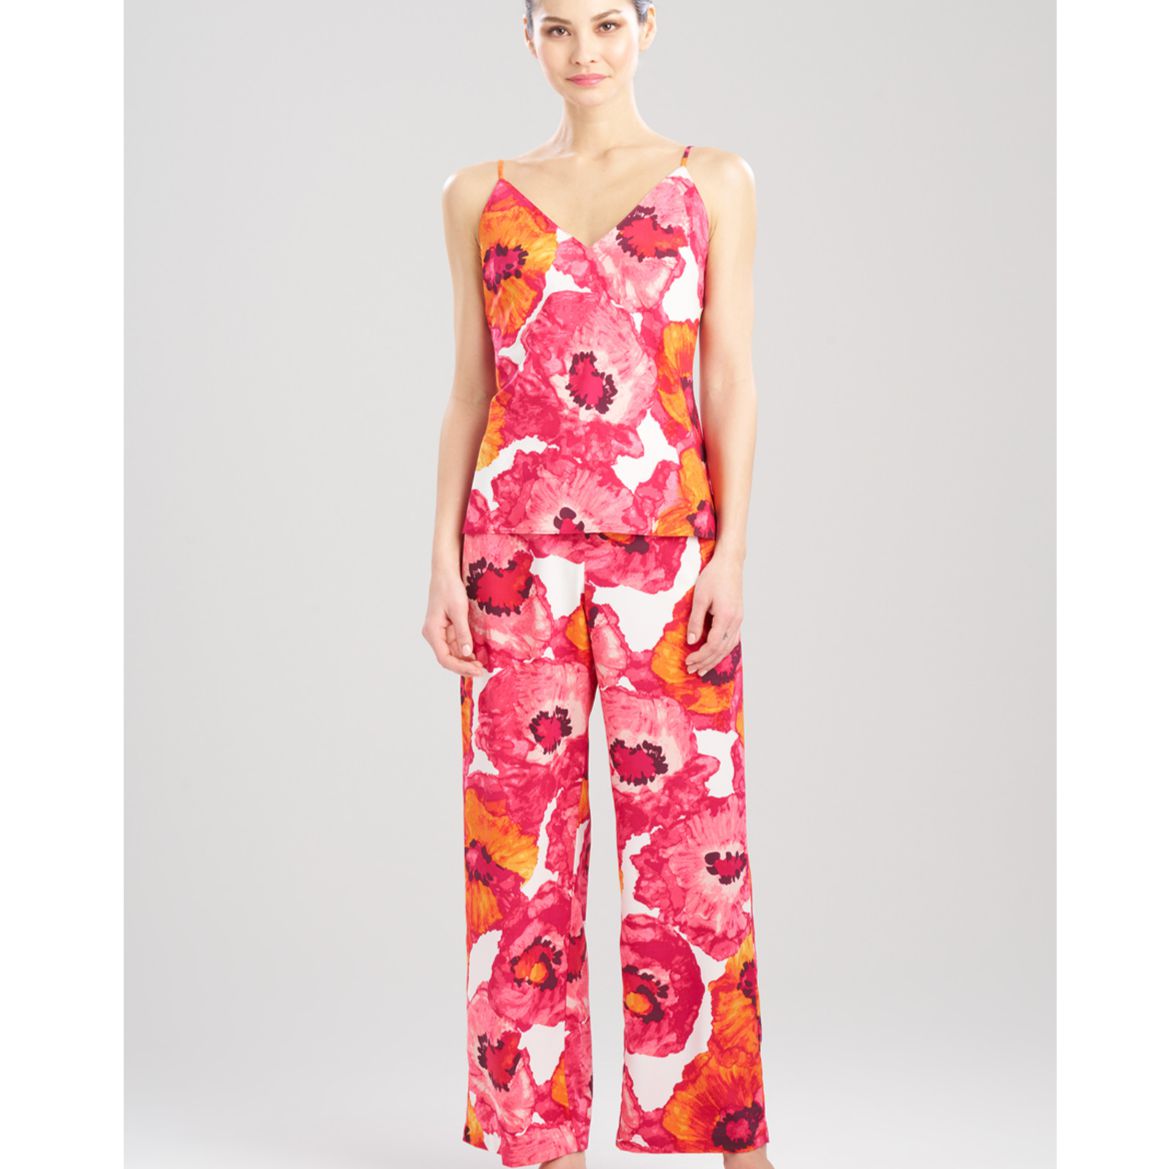 Natori Poppy Cami Pant PJ Set in Pink Combo S76026-Loungewear-Natori-Pink Combo-XSmall-Anna Bella Fine Lingerie, Reveal Your Most Gorgeous Self!